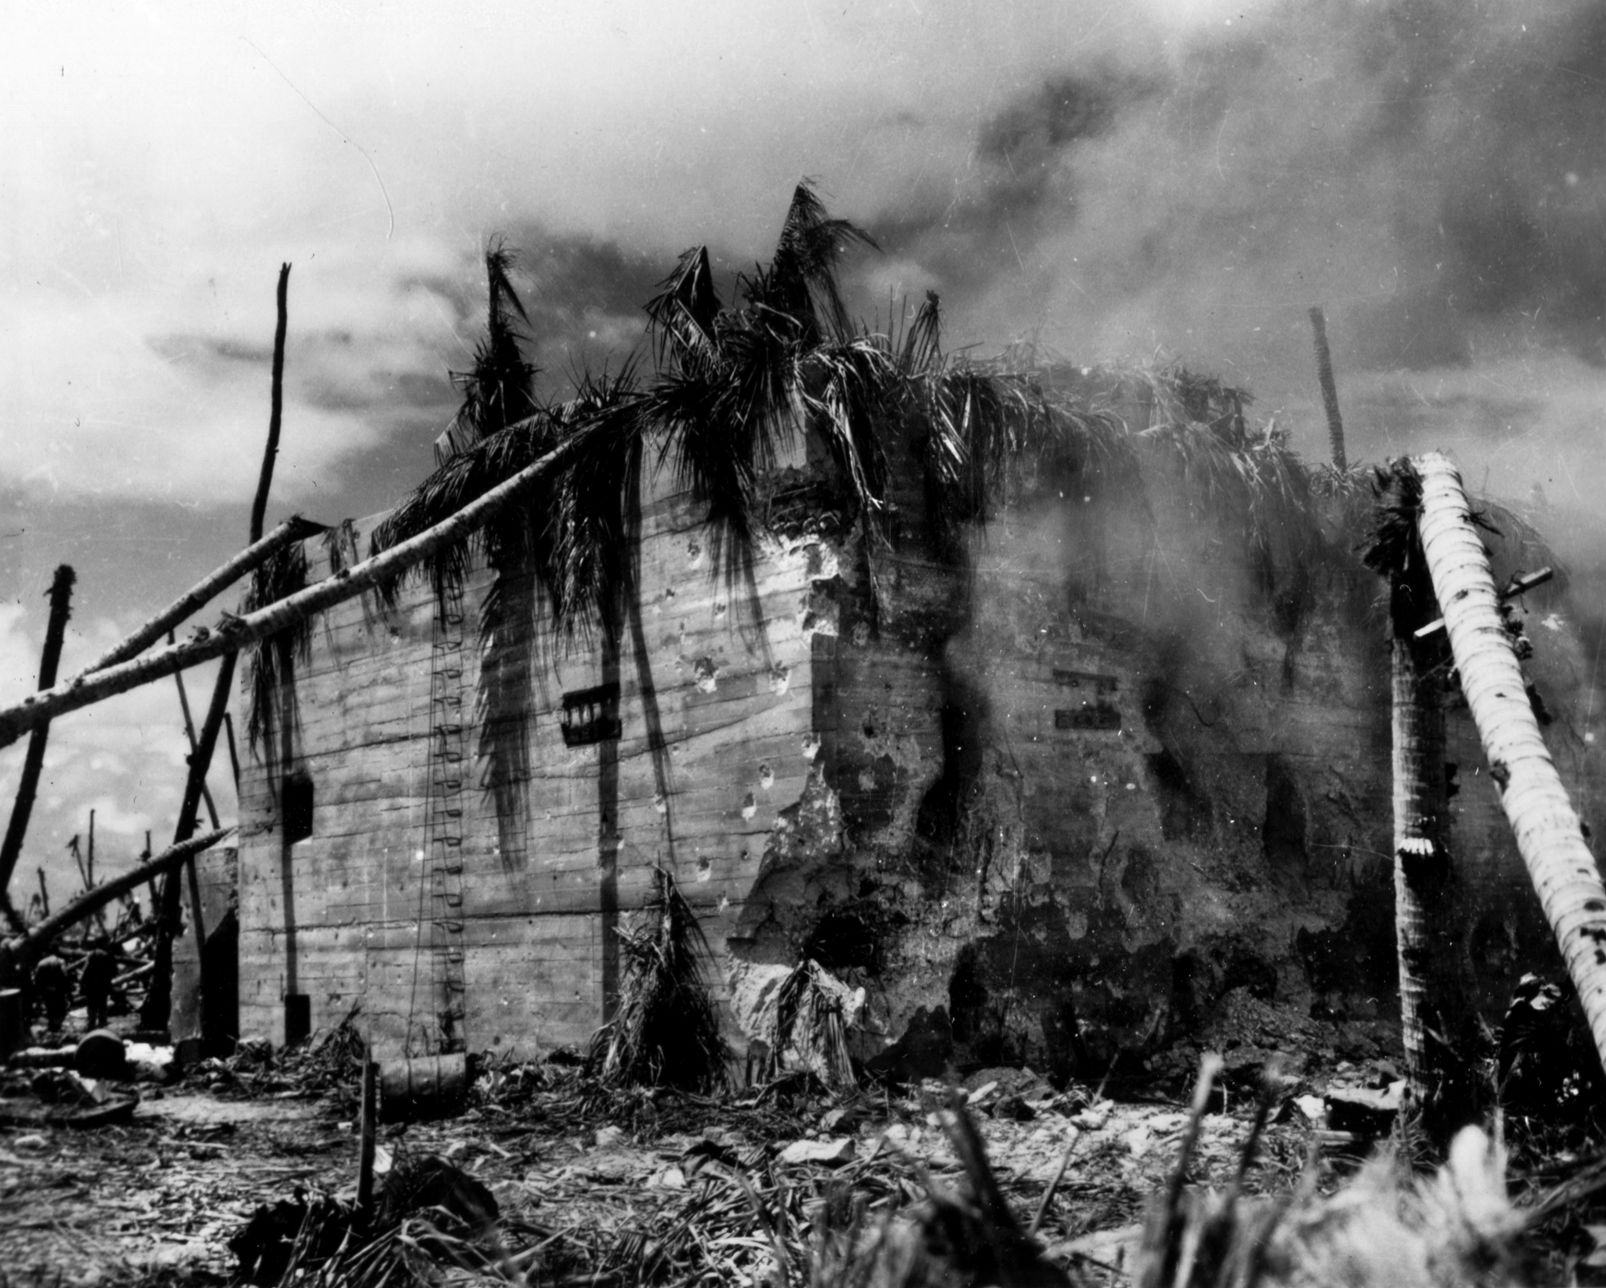 The Japanese command bunker on Tarawa was built of reinforced steel and concrete. Commander Keiji Shibazaki, and most of his staff were killed by a navy shell as they were exiting the bunker on the first day of the invasion.